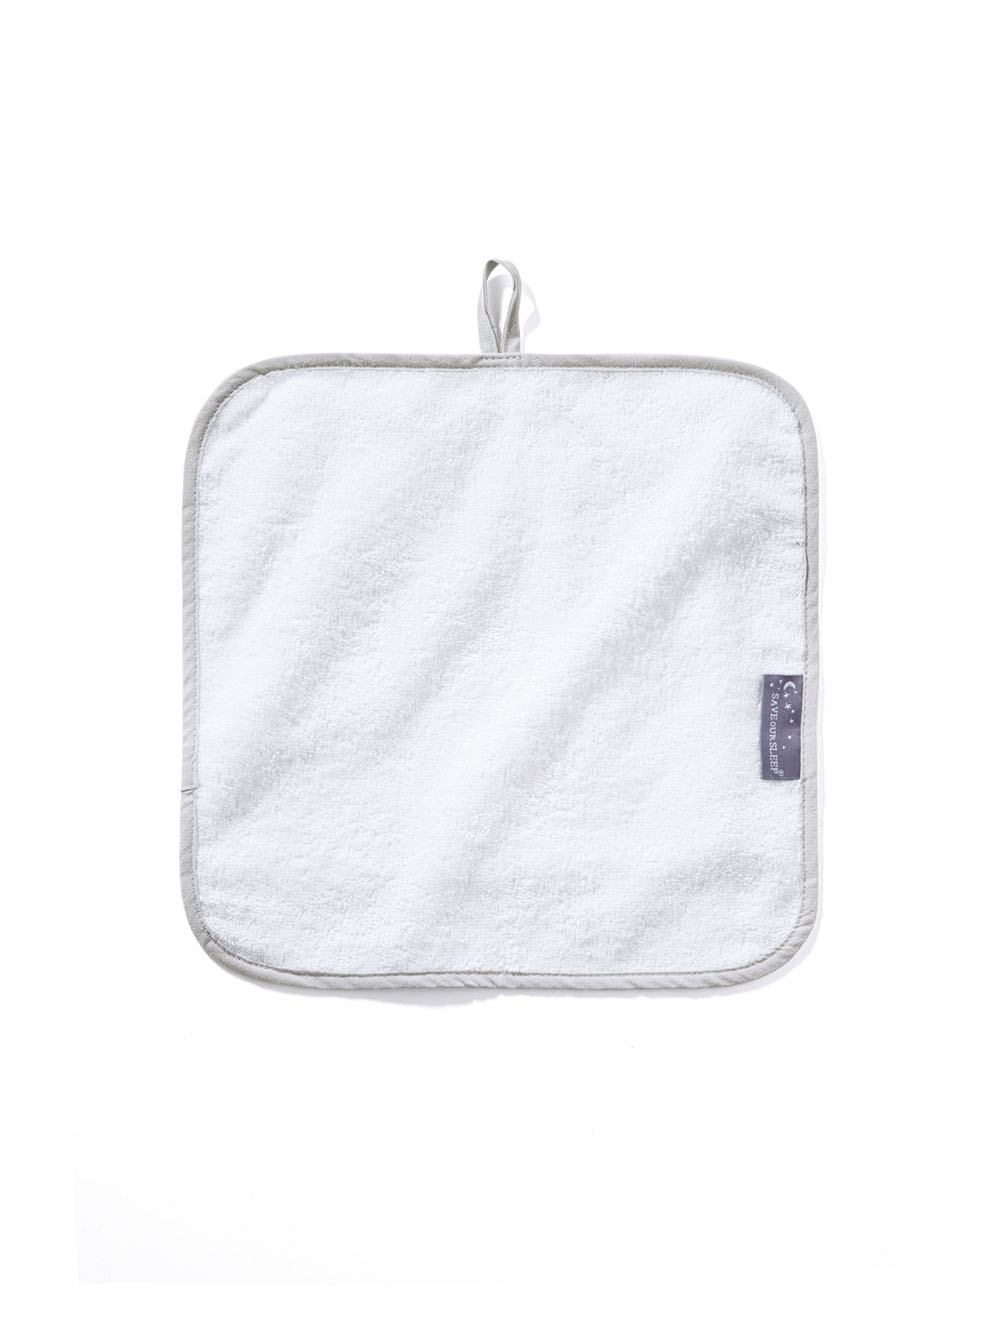 Wash clothes reusable wipes - face washers  Packs